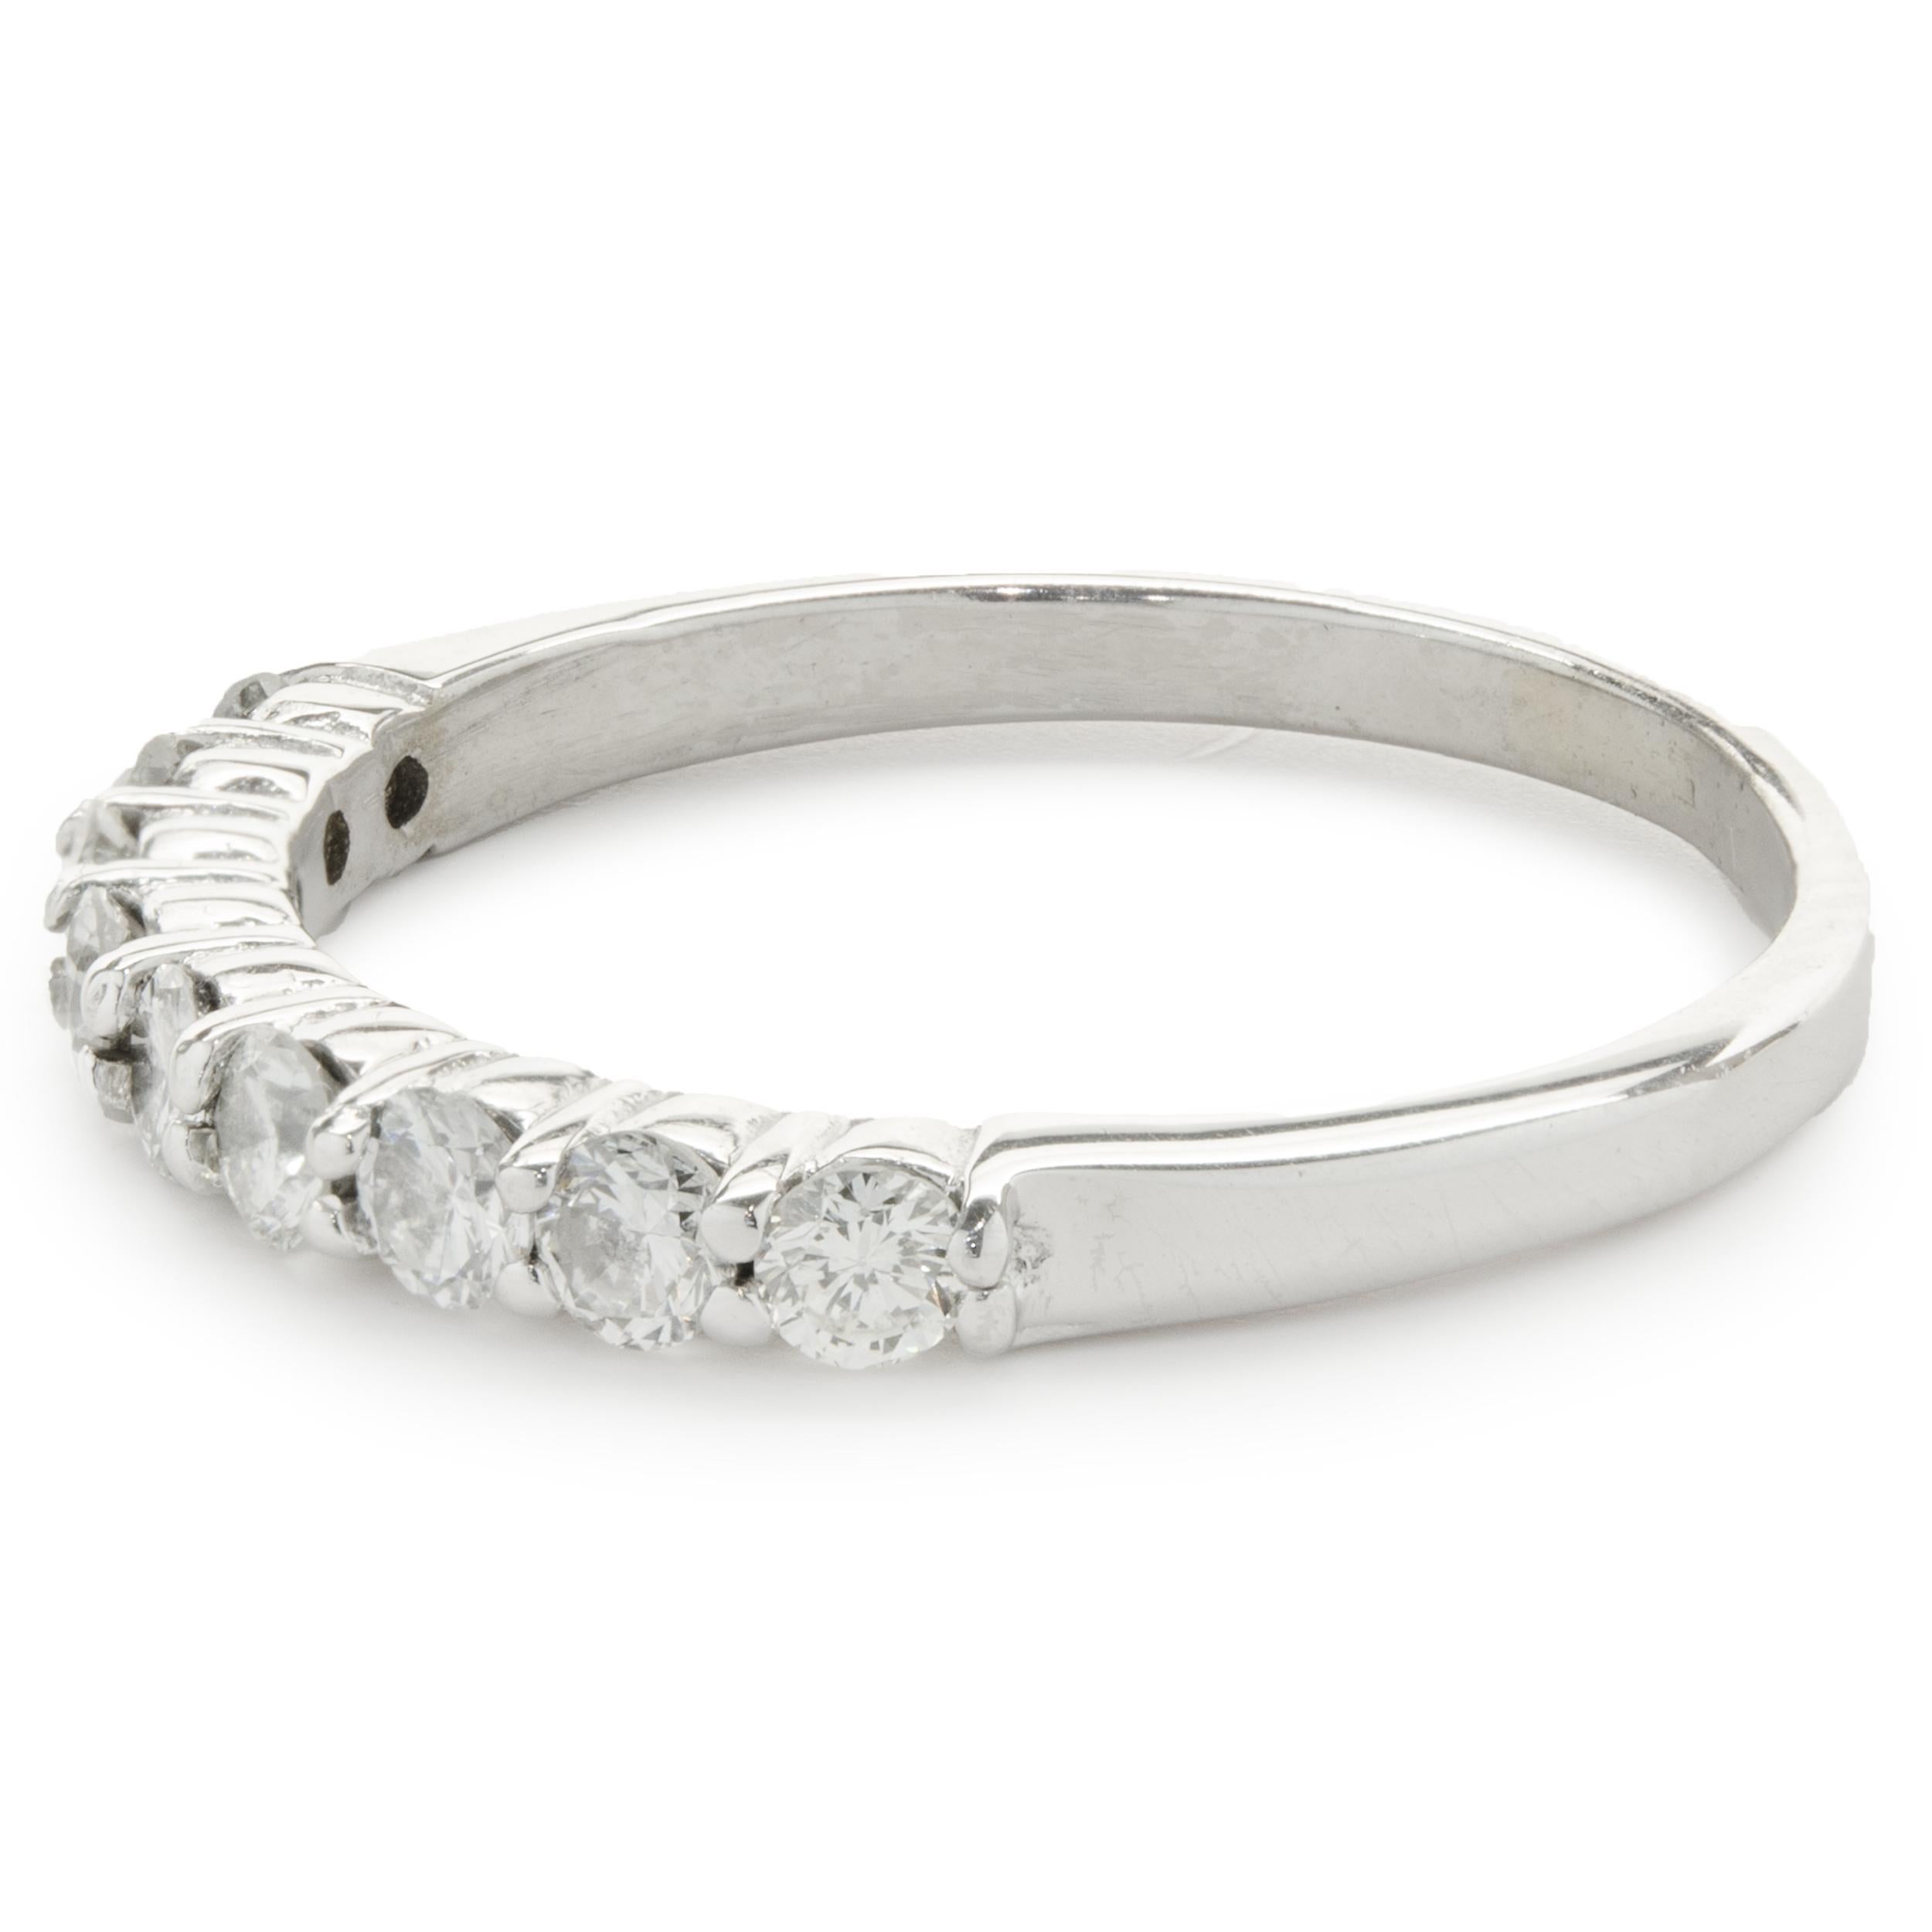 Designer: custom
Material: 14K white gold
Diamond: 9 round brilliant cut = .54cttw
Color: I
Clarity: SI1
Size: 7 complimentary sizing available 
Weight: 2.22 grams
